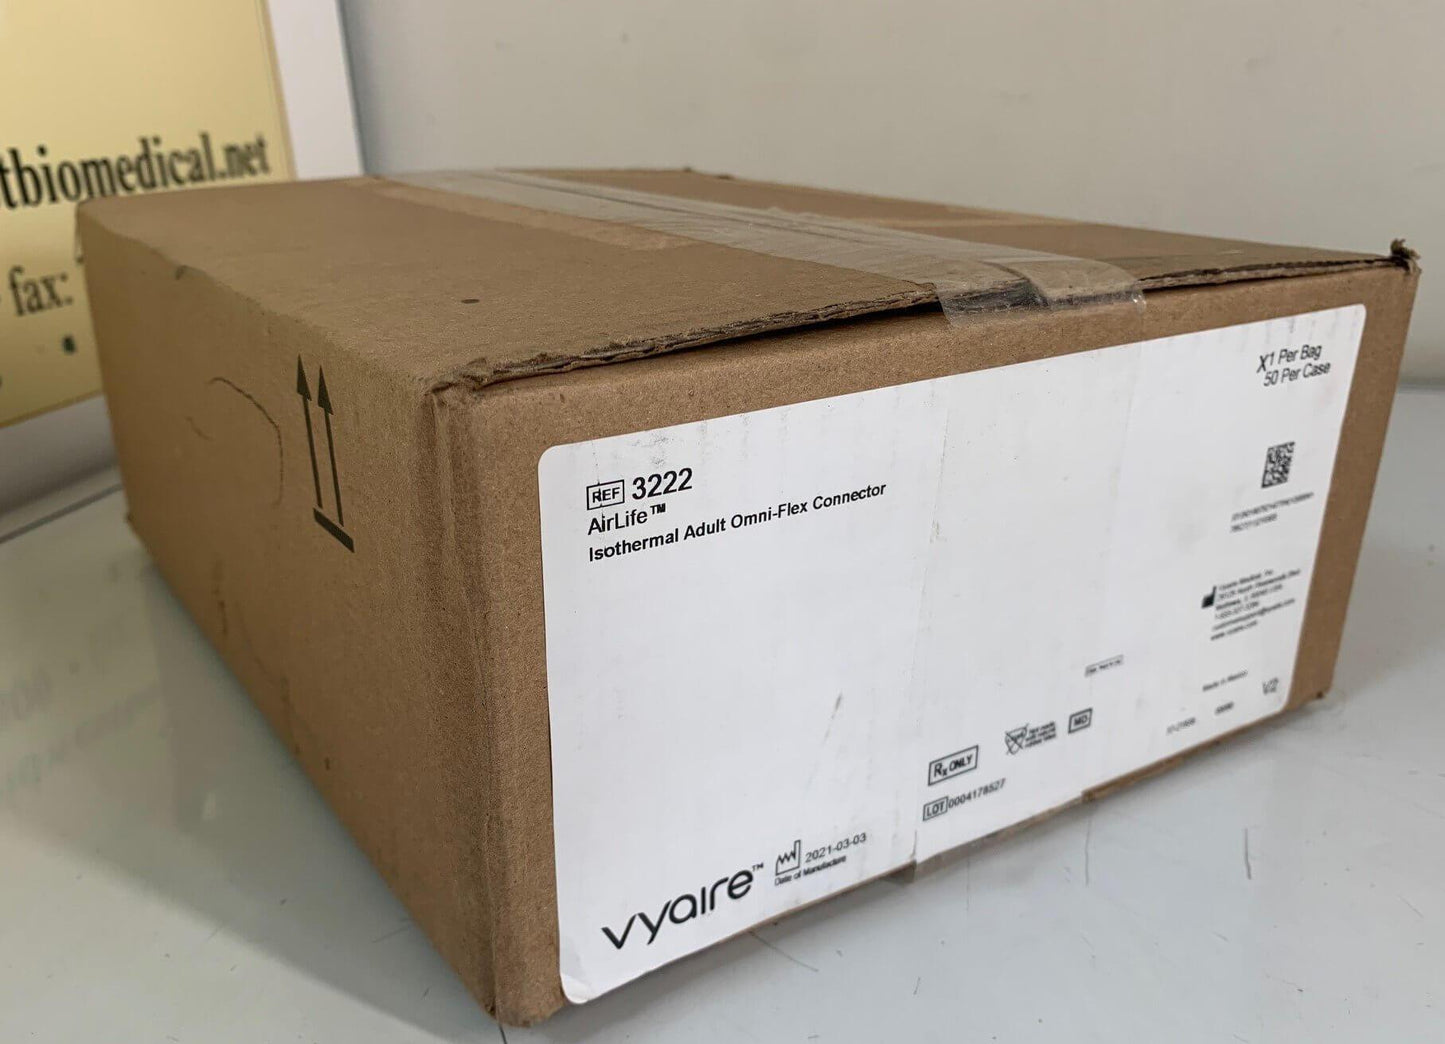 NEW Case of 50 Vyaire Medical Airlife Isothermal Adult Omni-Flex Connector 3222 with FREE Shipping - MBR Medicals